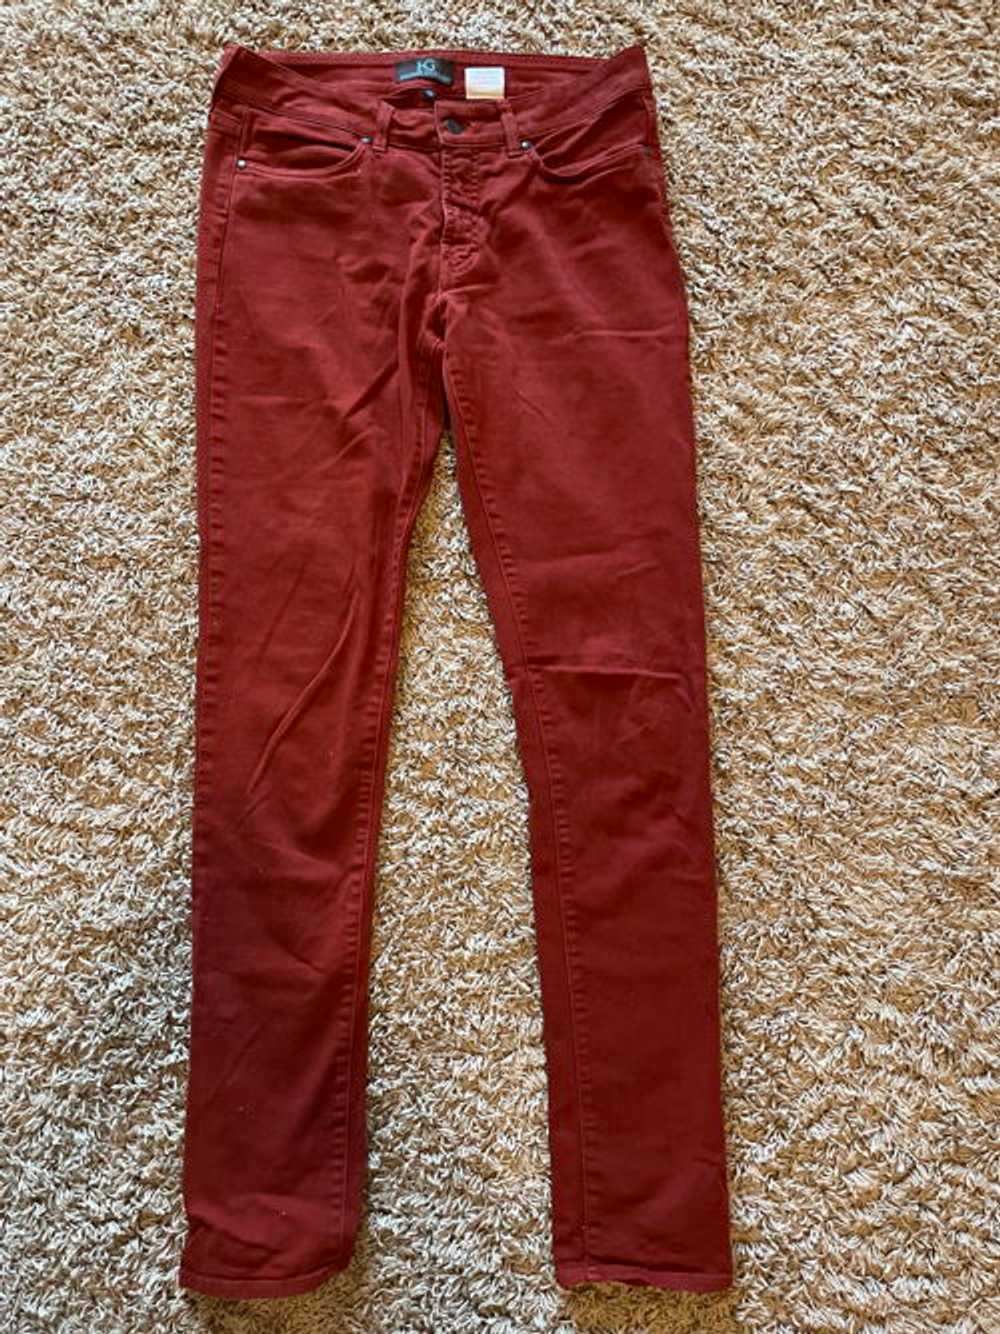 Tall Size Height Goddess Burnt Red Jeans (31 wais… - image 3